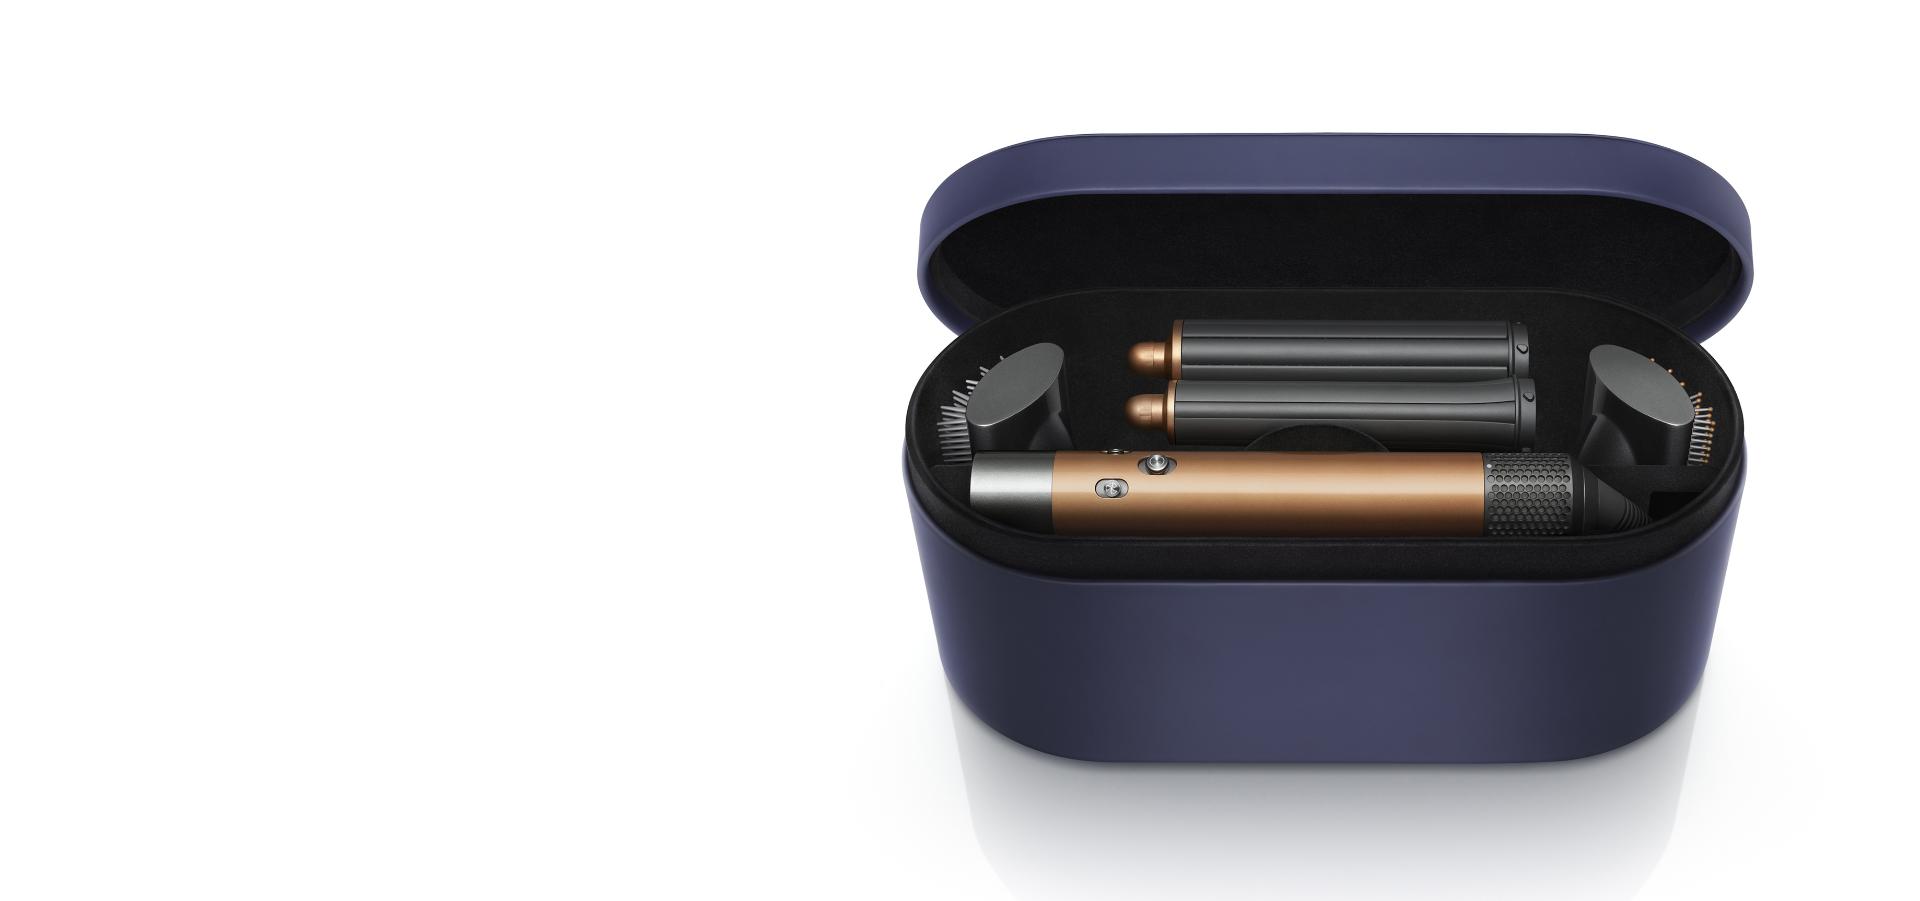 Dyson presentation case containing Dyson Airwrap multi-styler and attachments